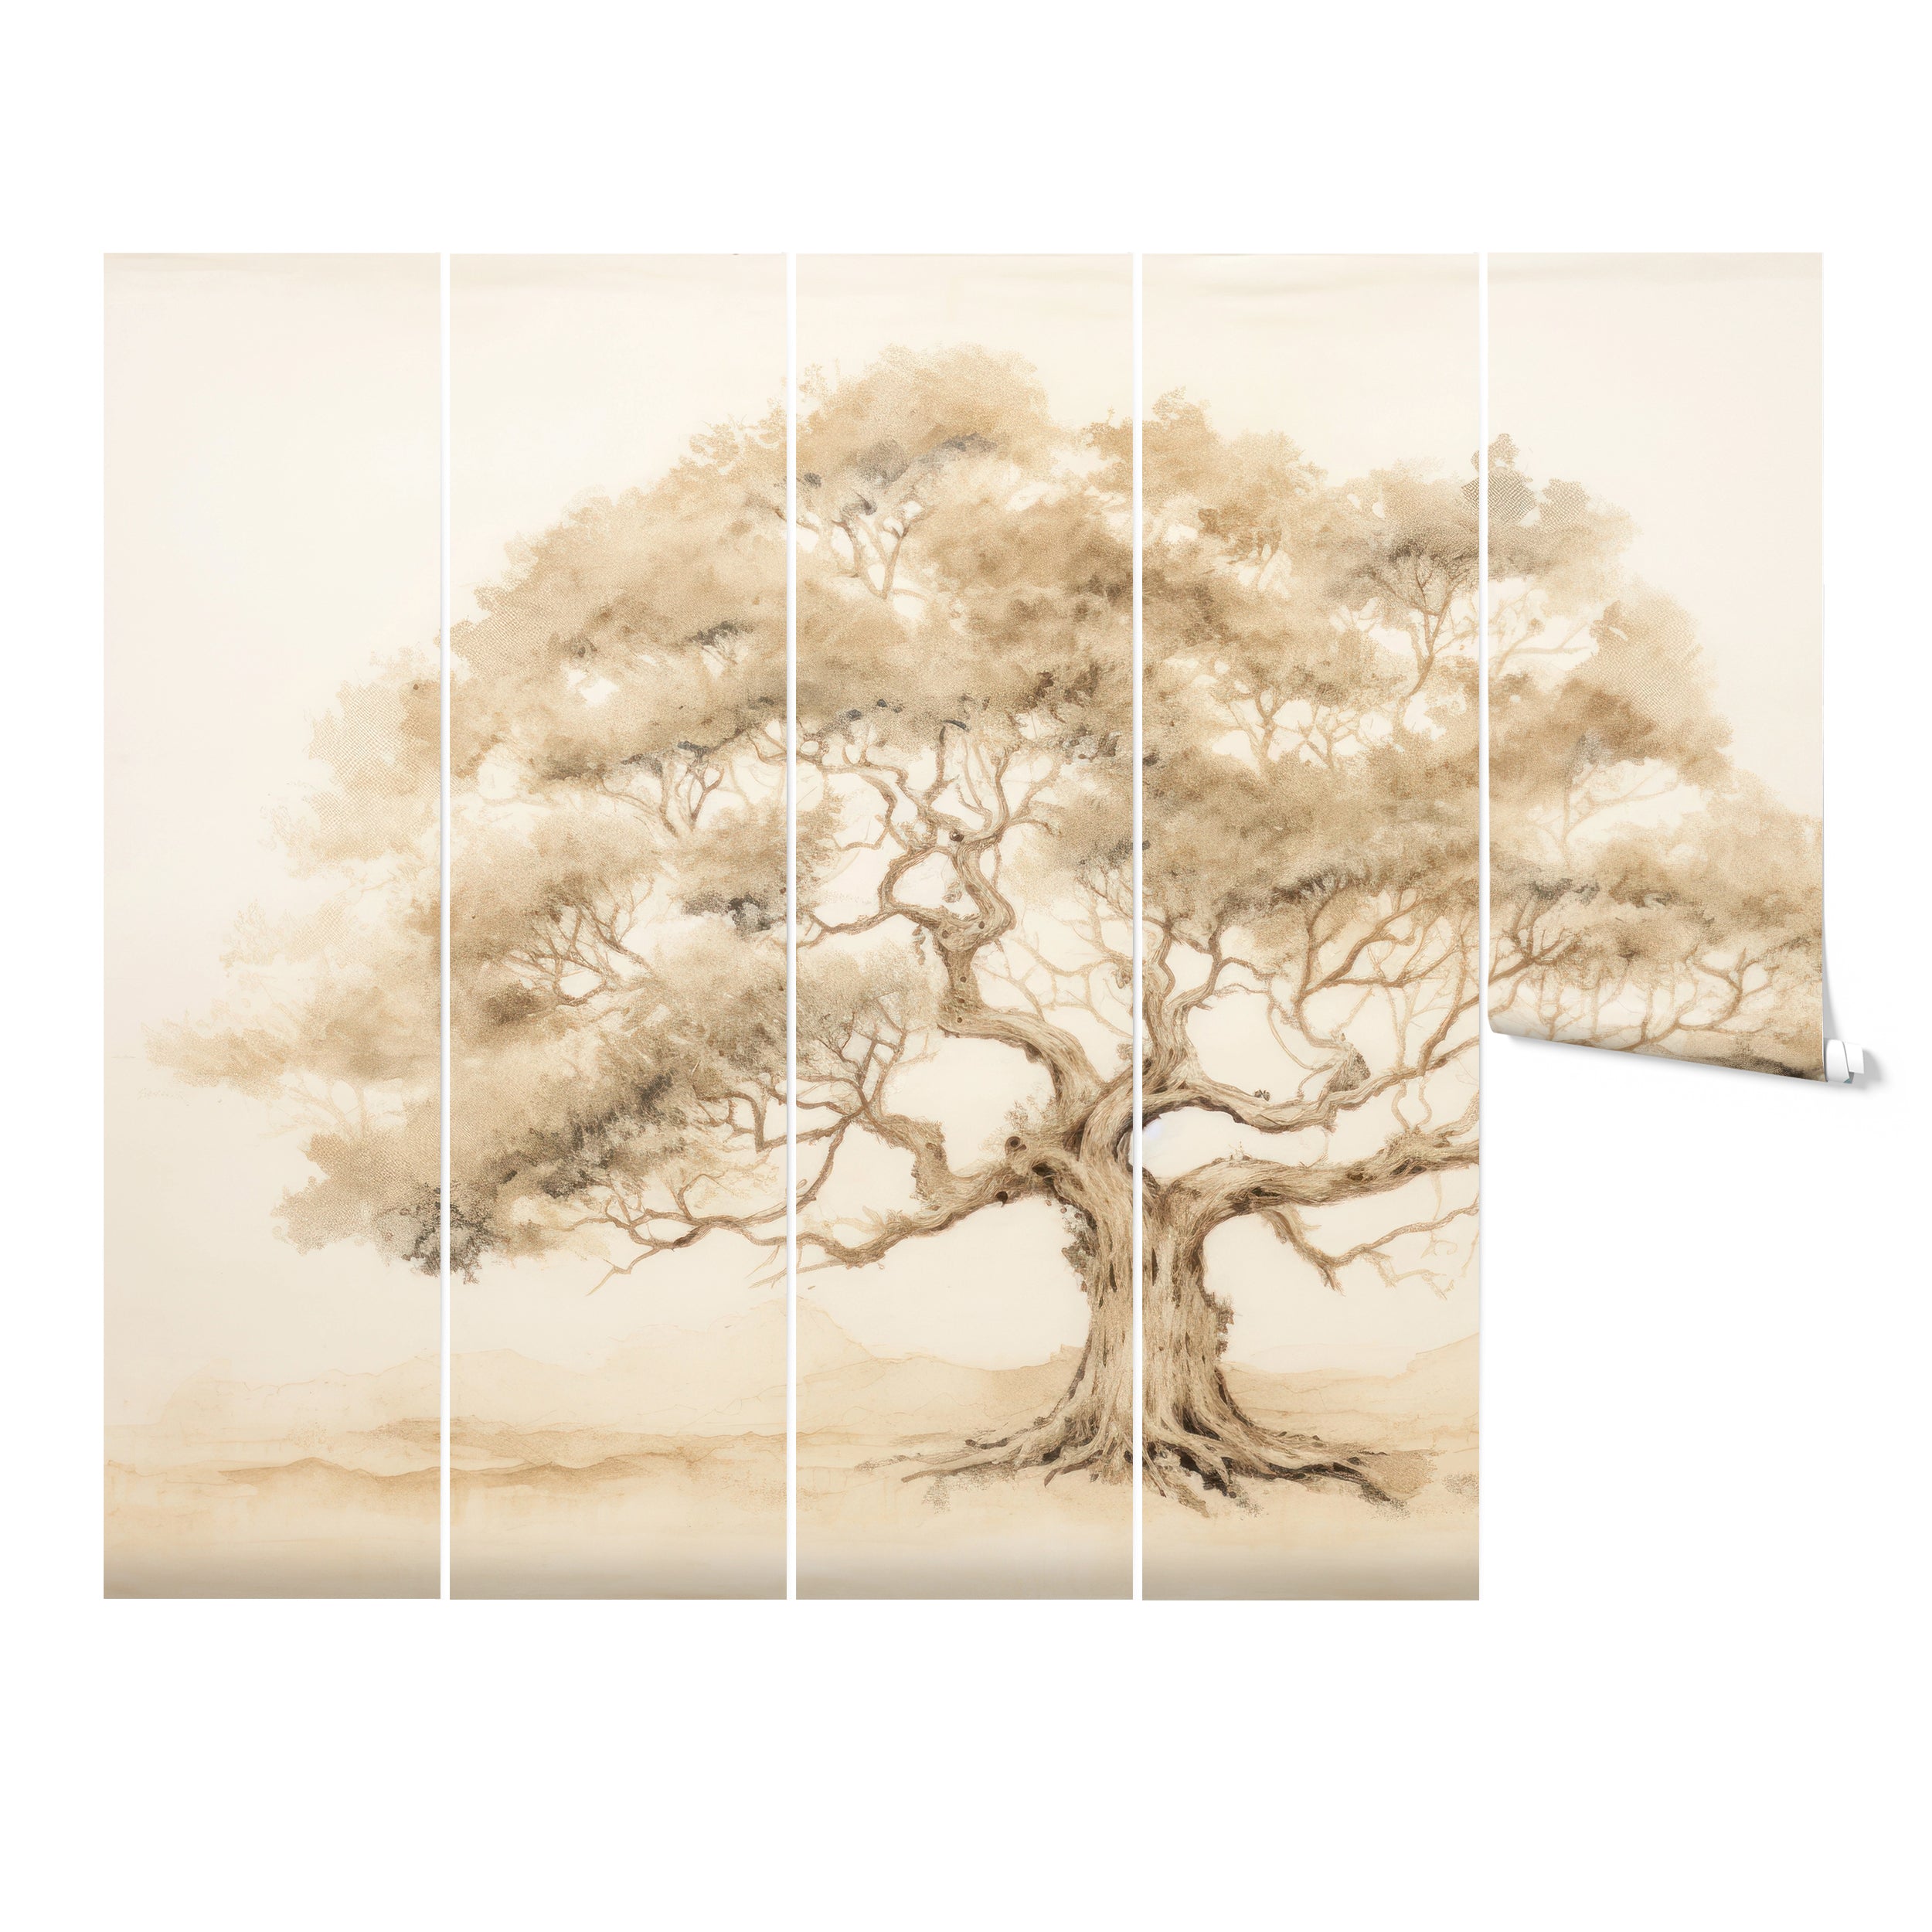 Neutral-toned wallpaper mural featuring a detailed sketch of a large tree with sprawling branches against a soft beige background, displayed in five rolls.